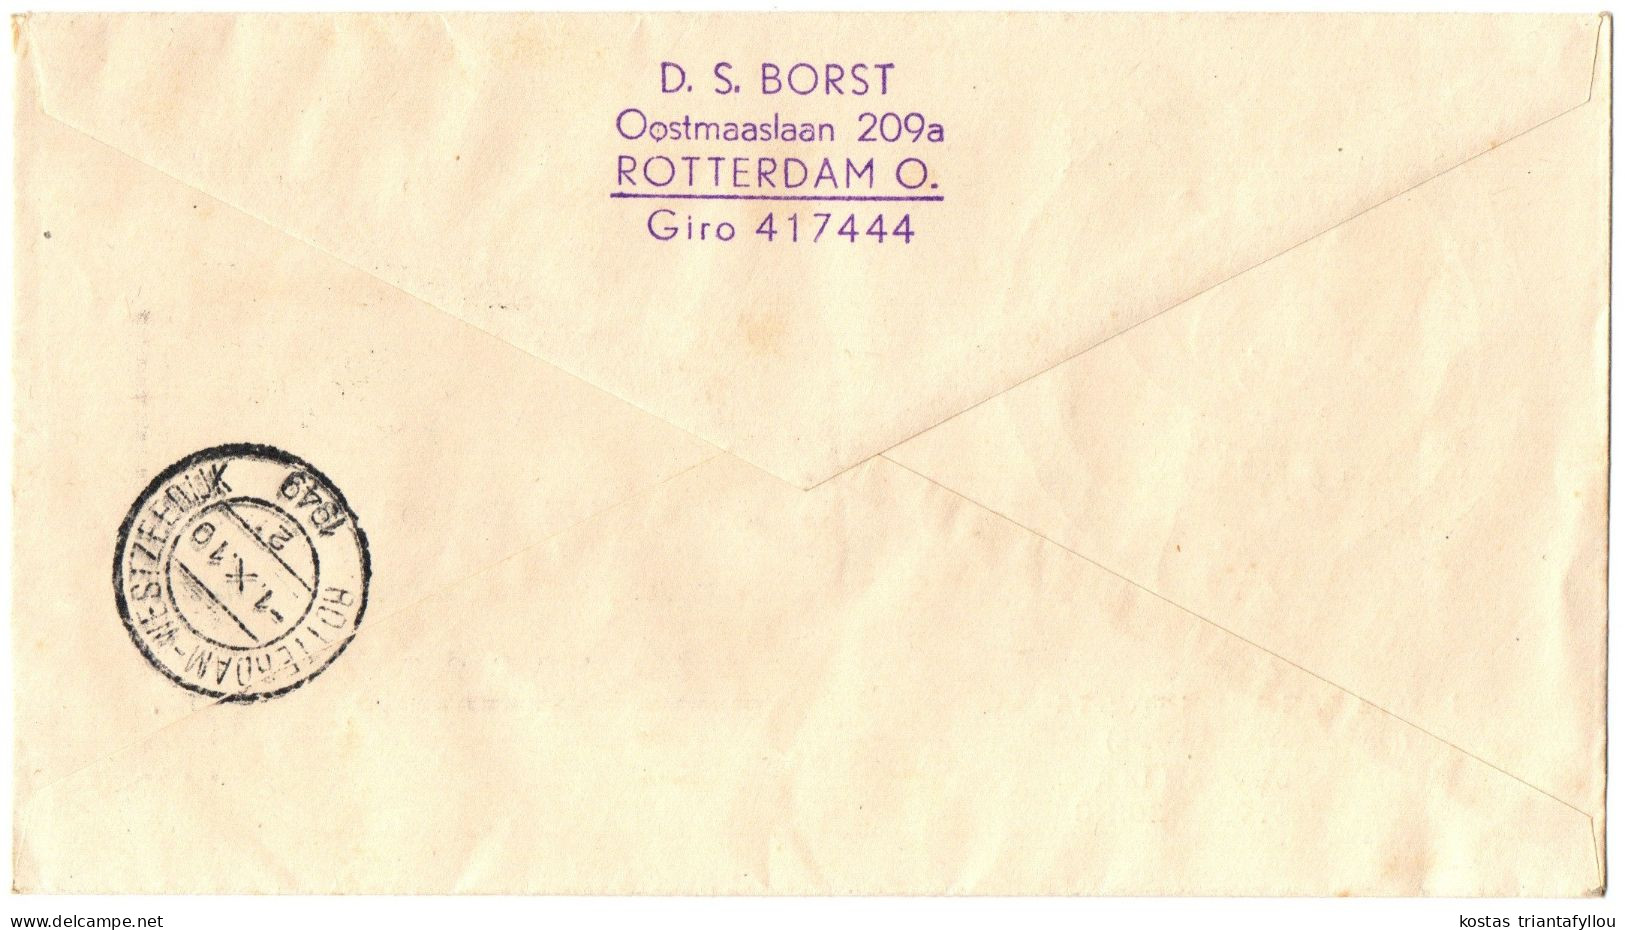 1,50 NETHERLANDS, 1949, FIRST DAY OF ISSUE COVER TO EGYPT - Storia Postale